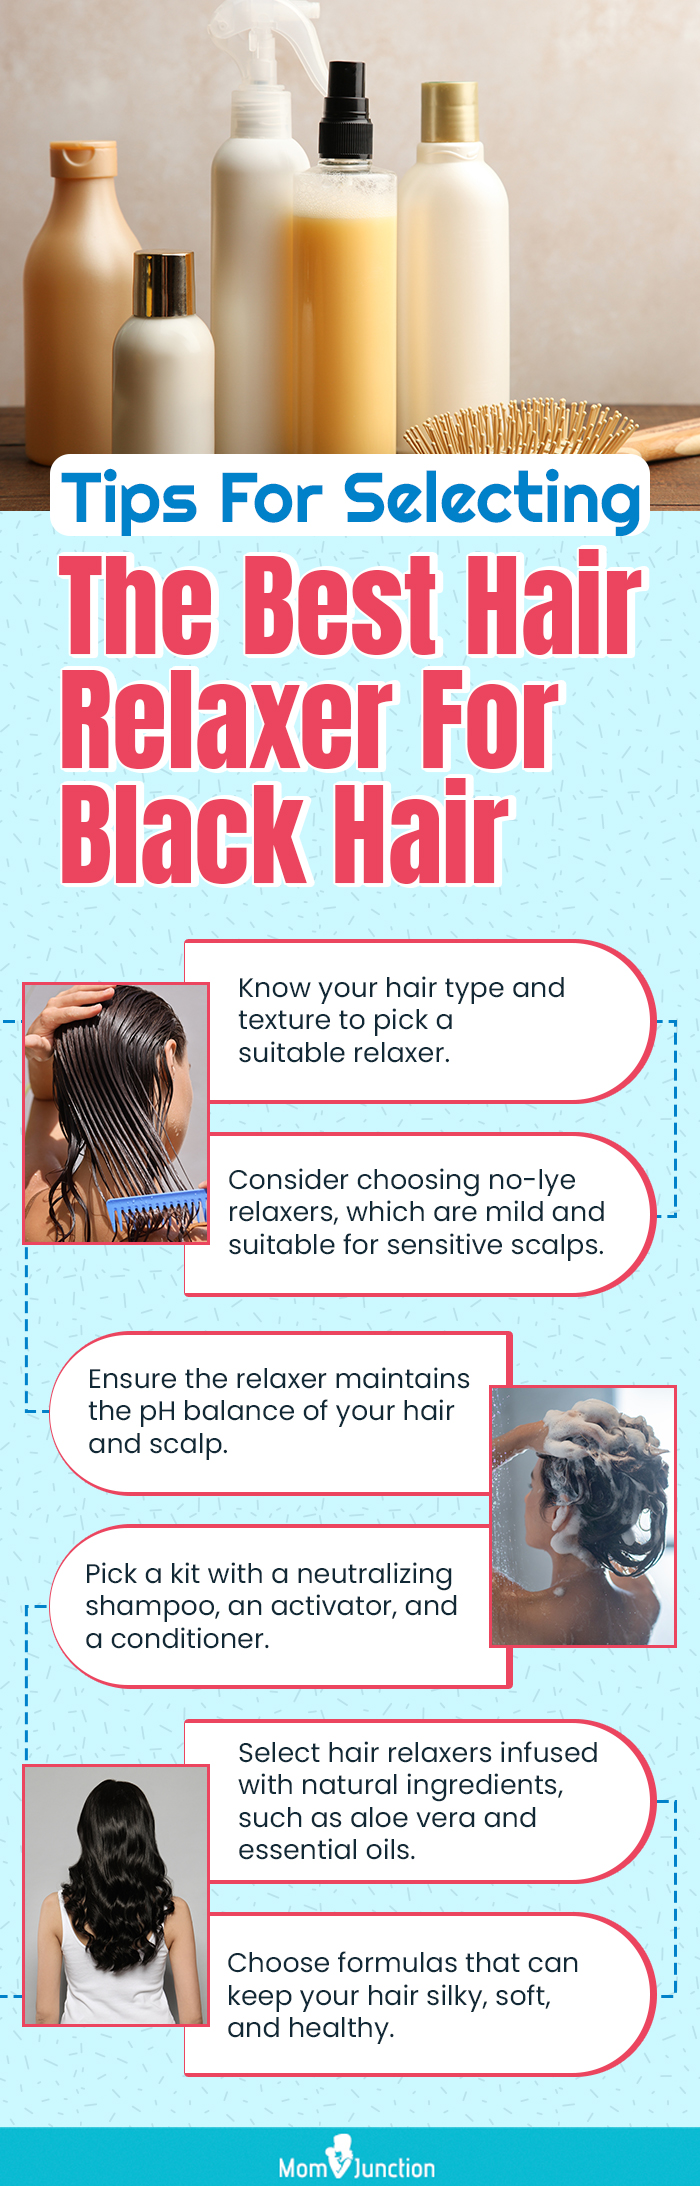 Tips For Selecting The Best Hair Relaxer For Black Hair (infographic)